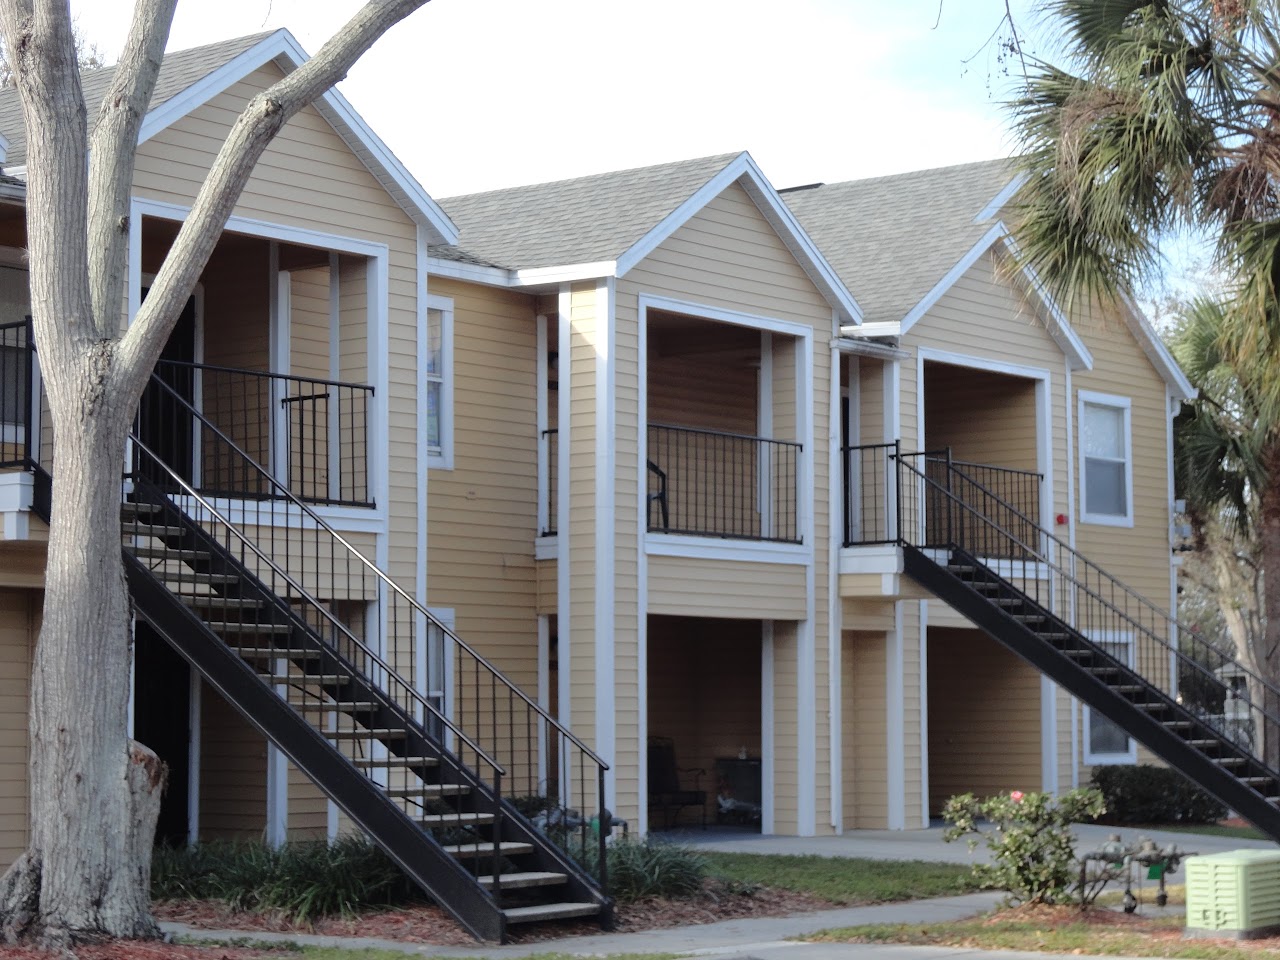 Photo of MIRA LAGOS. Affordable housing located at 358 34TH AVE DRIVE EAST BRADENTON, FL 34208